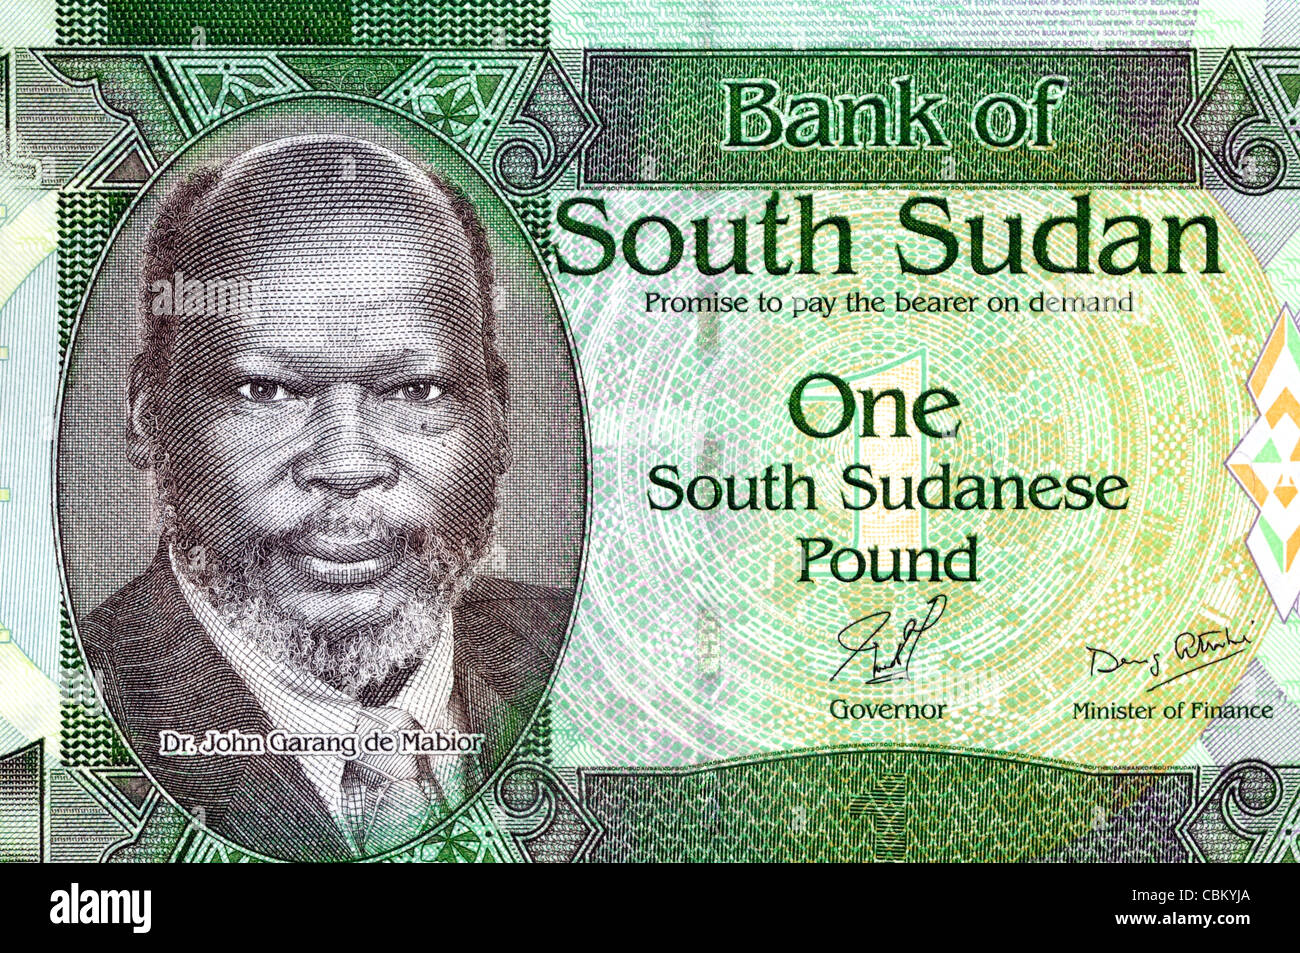 South Sudan 1 One Pound Bank Note. Stock Photo